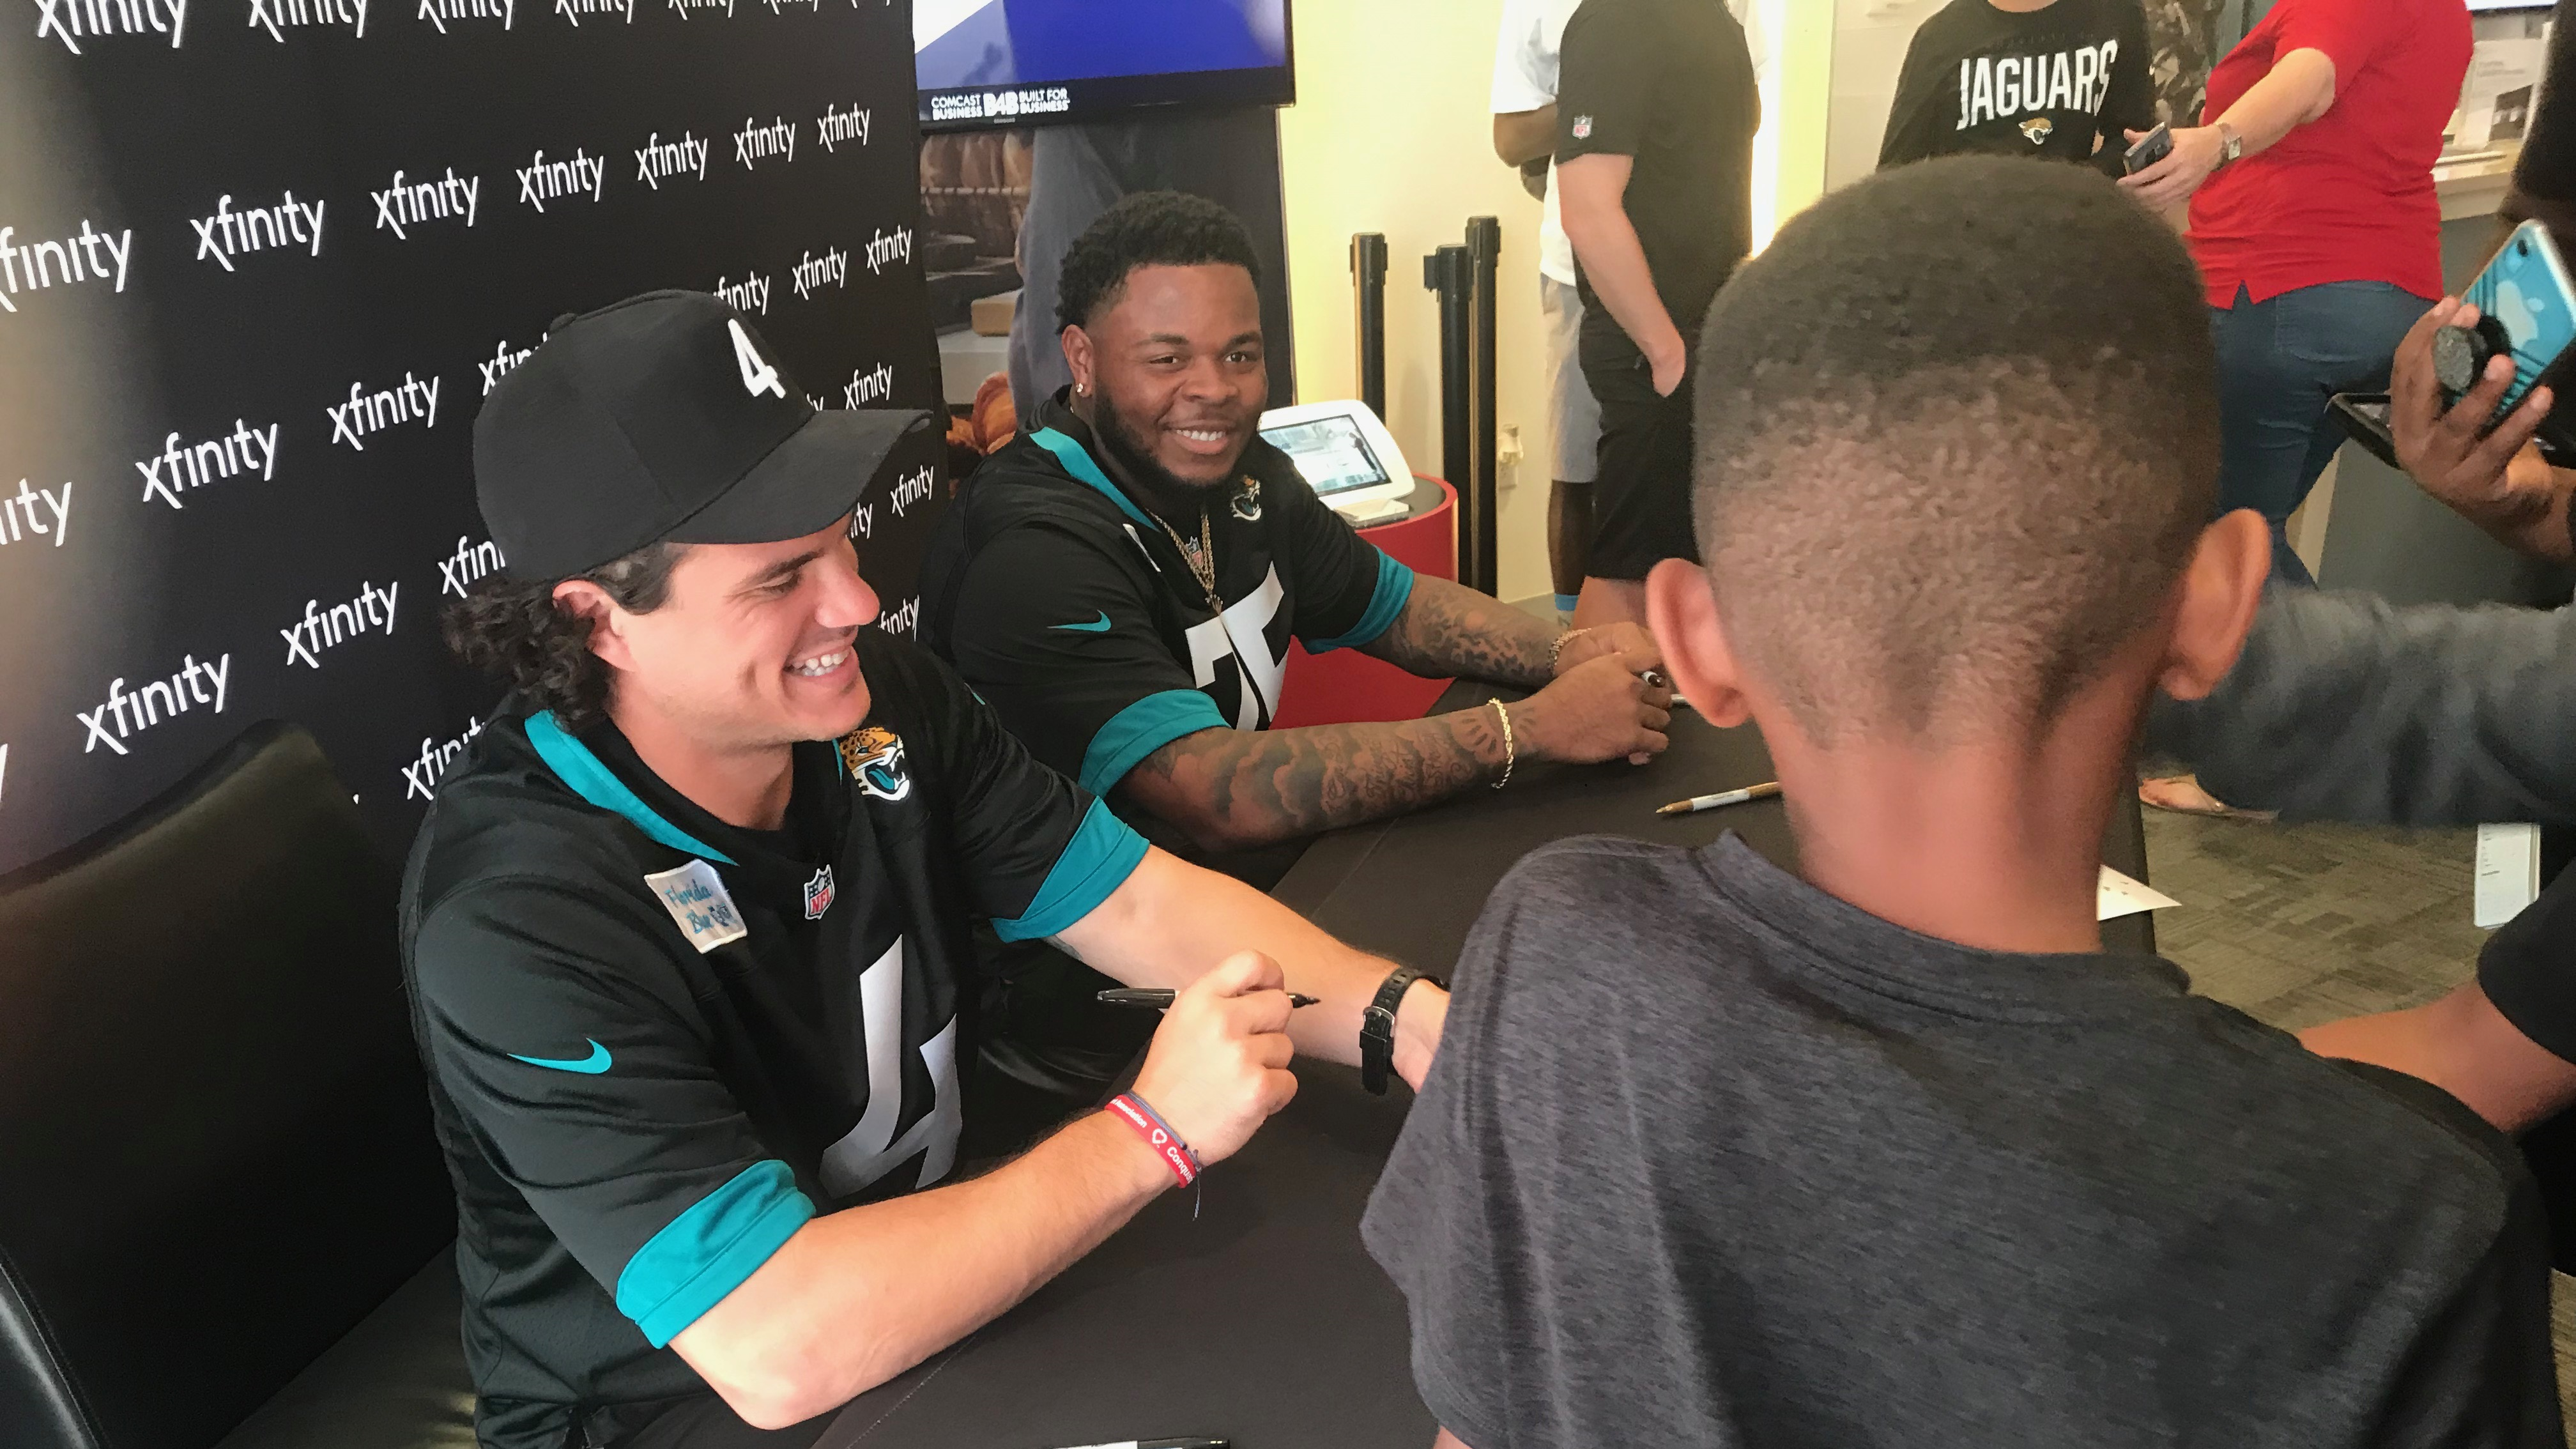 Members of the Jacksonville Jaguars sign autographs at an Xfinity event.